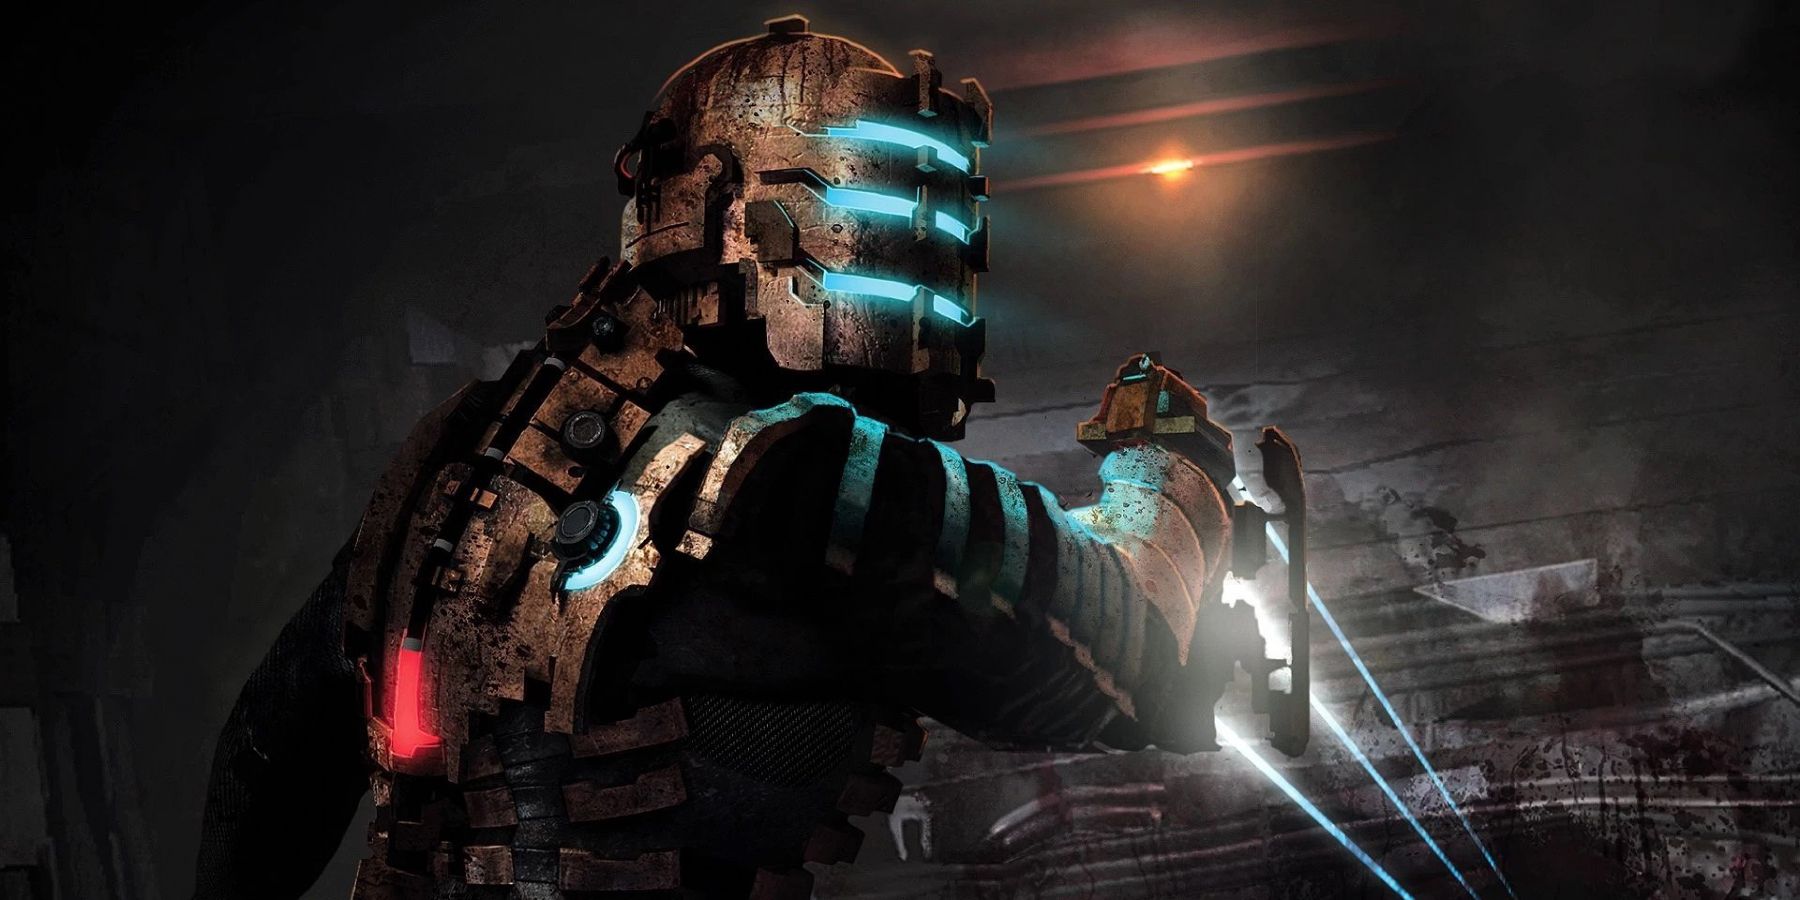 A character fires a weapon in Dead Space